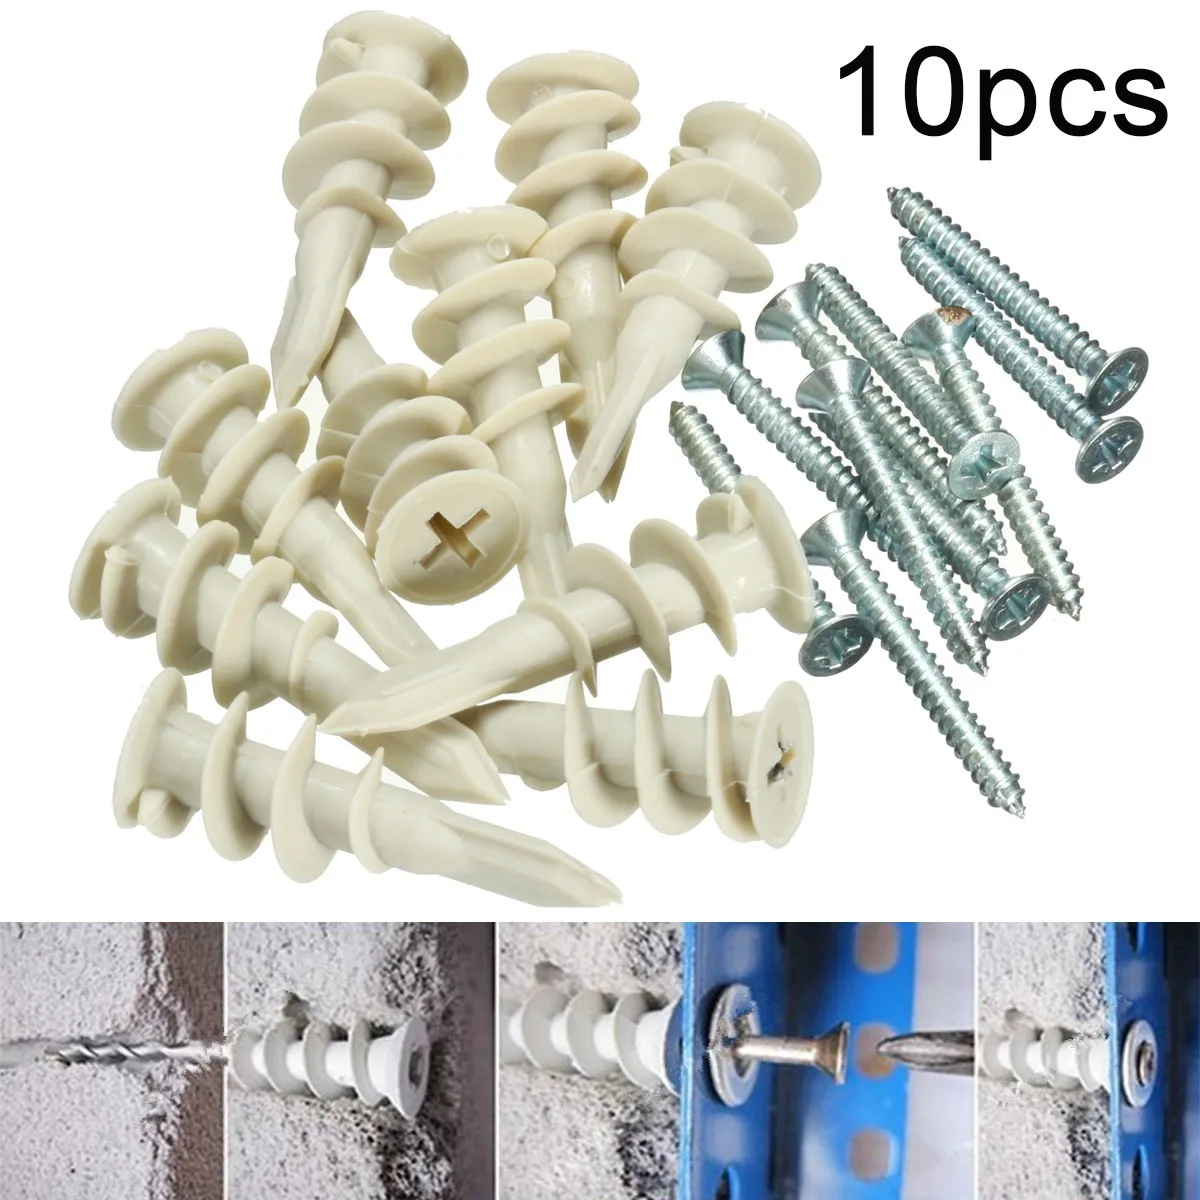 PLASTERBOARD FIXINGS SELF DRILL CAVITY WALL SPEED ANCHOR PLUGS INCLUDING SCREWS 